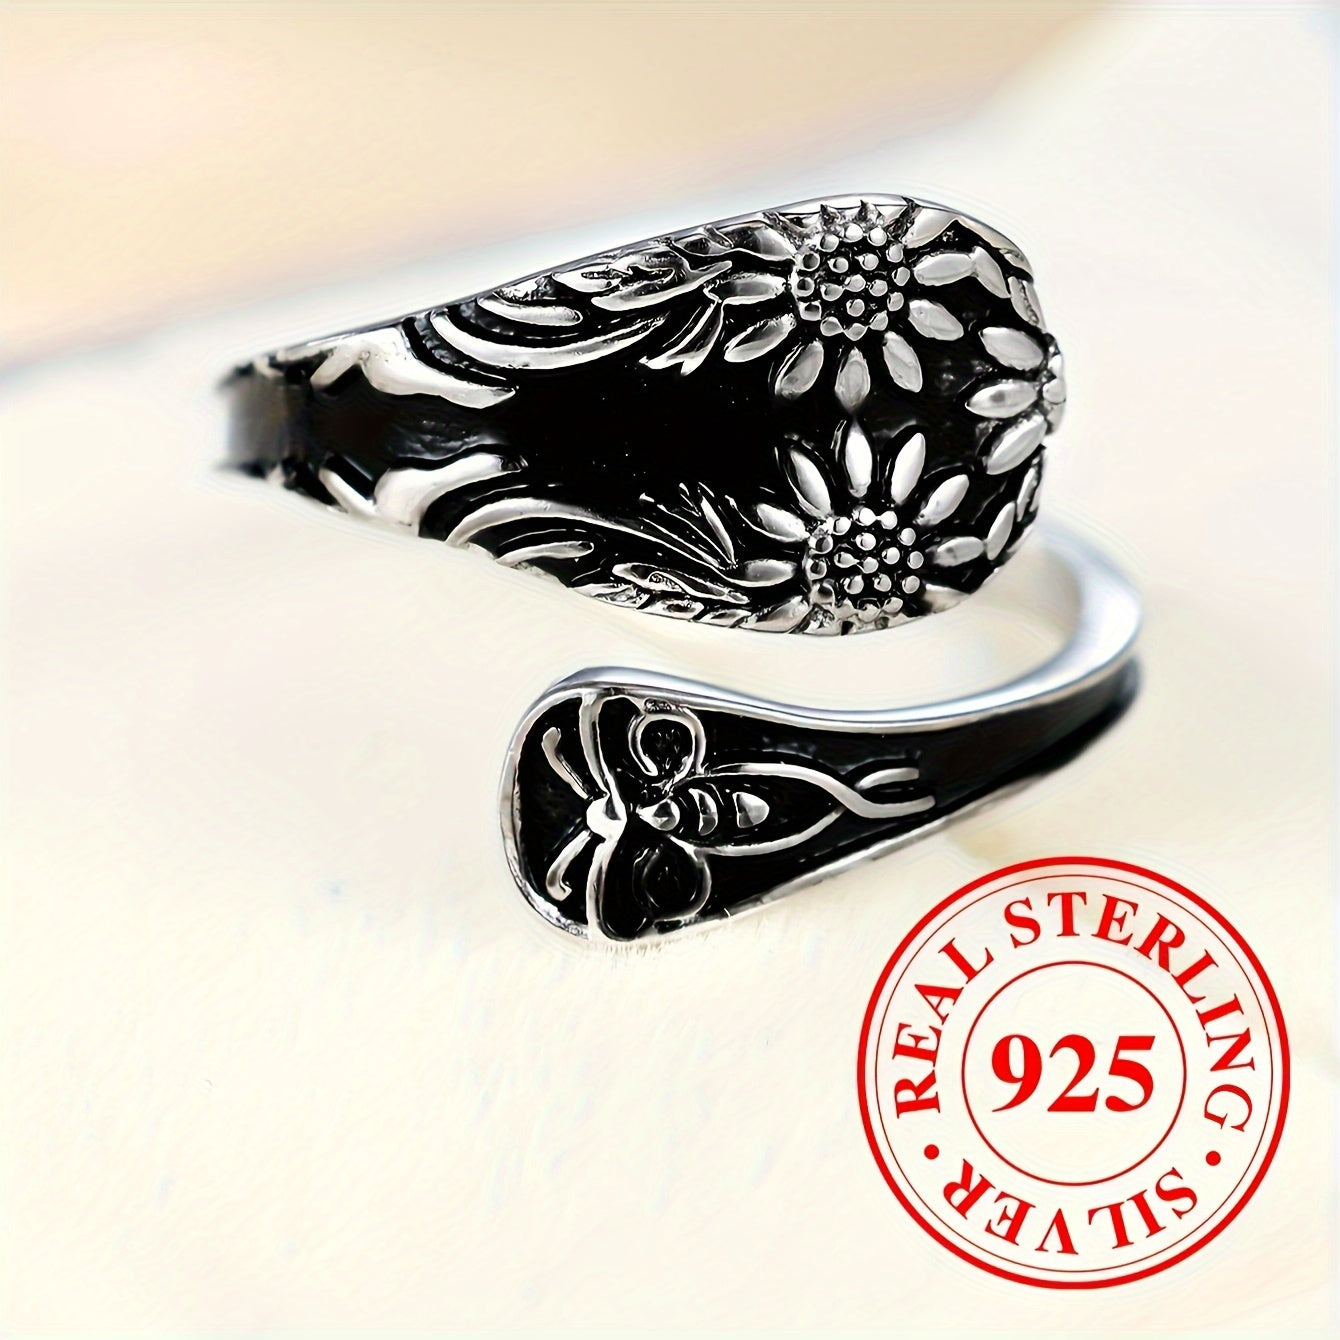 Vintage Silver Spoon Ring 925 Sterling Silver Showcase Silverware Cutlery Pattern Represent Ecological Values Of Reuse Highlight An Improvisational Spirit Old England Fashion Link To The Past